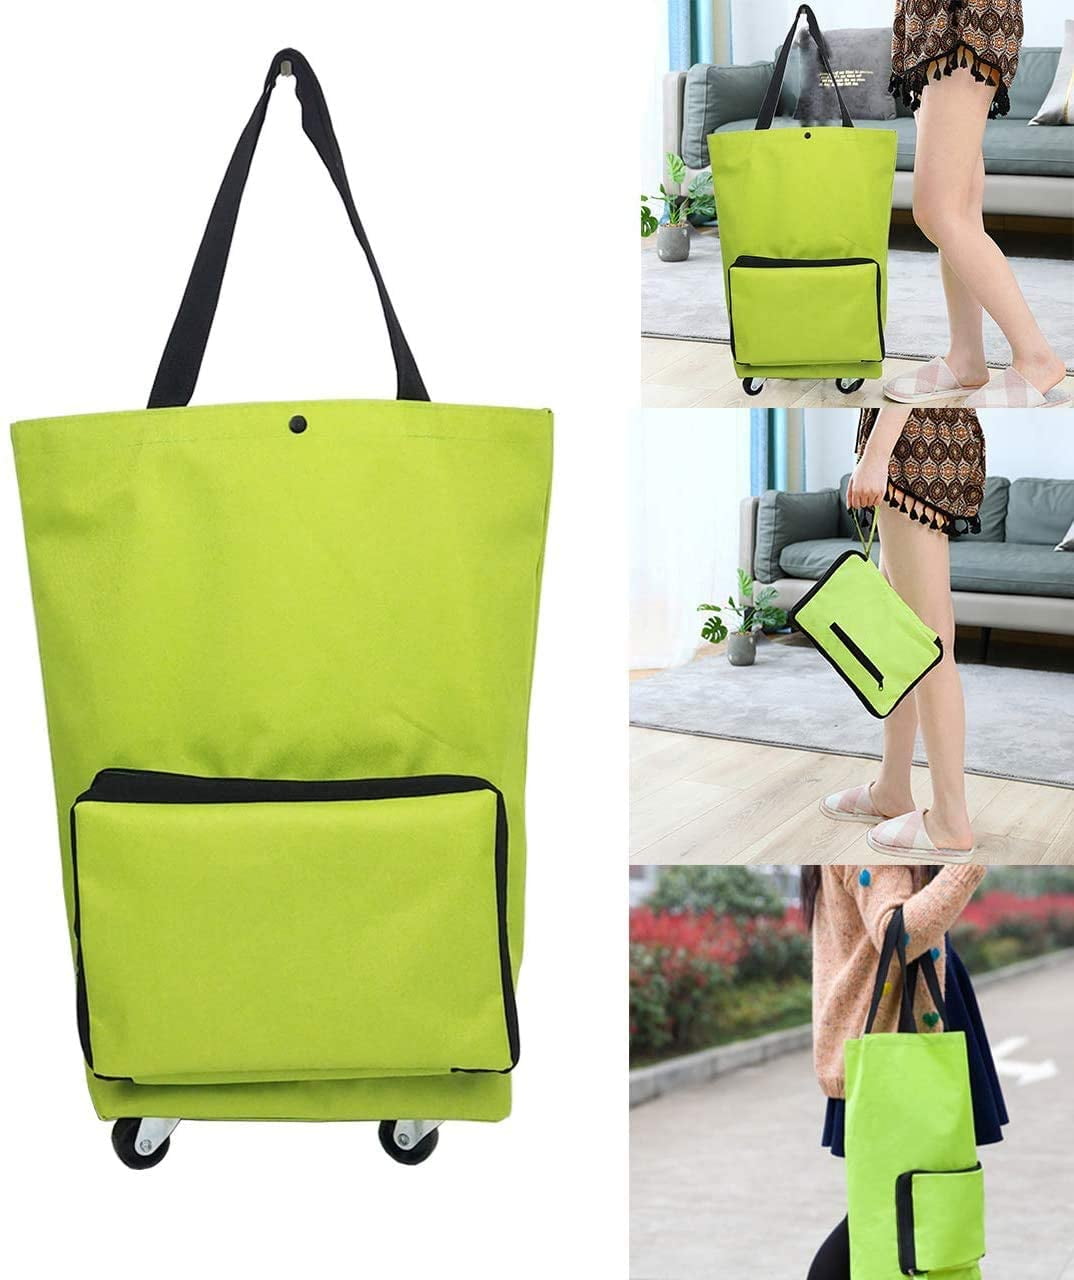 Windfall Trolley Folding Shopping Bag Reusable with Wheels Tote ...